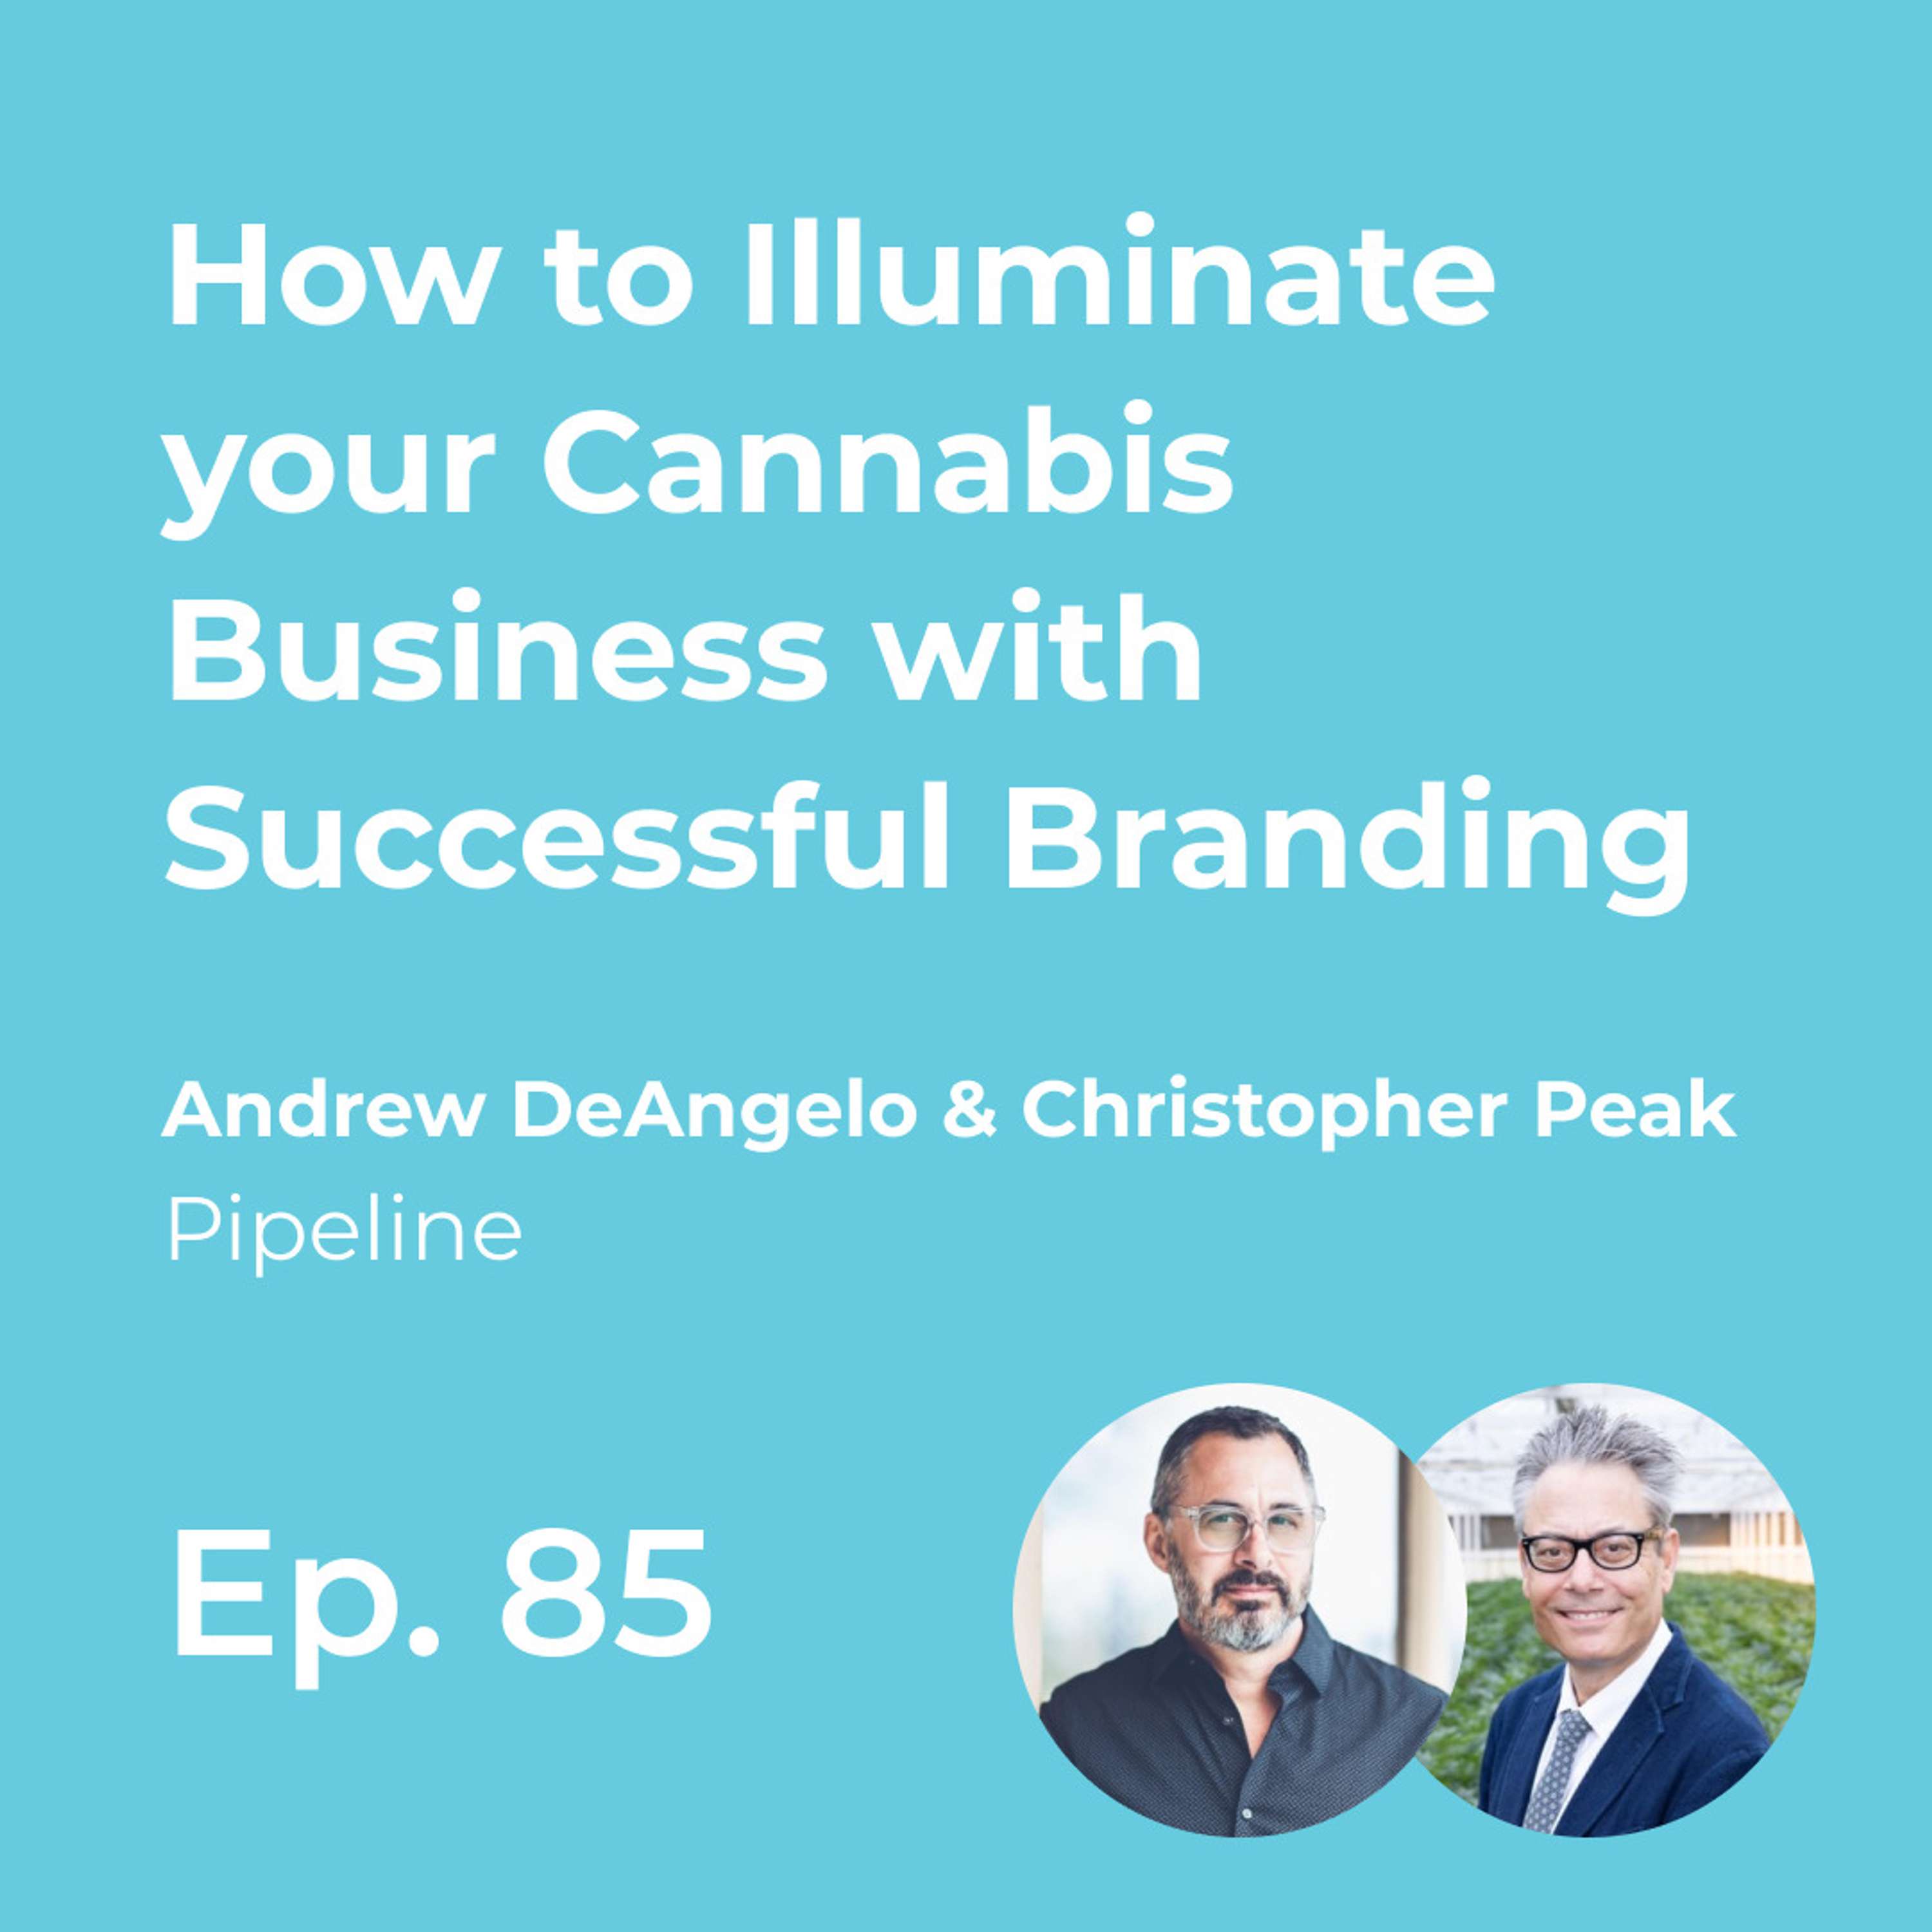 How to Illuminate your Cannabis Business with Successful Branding